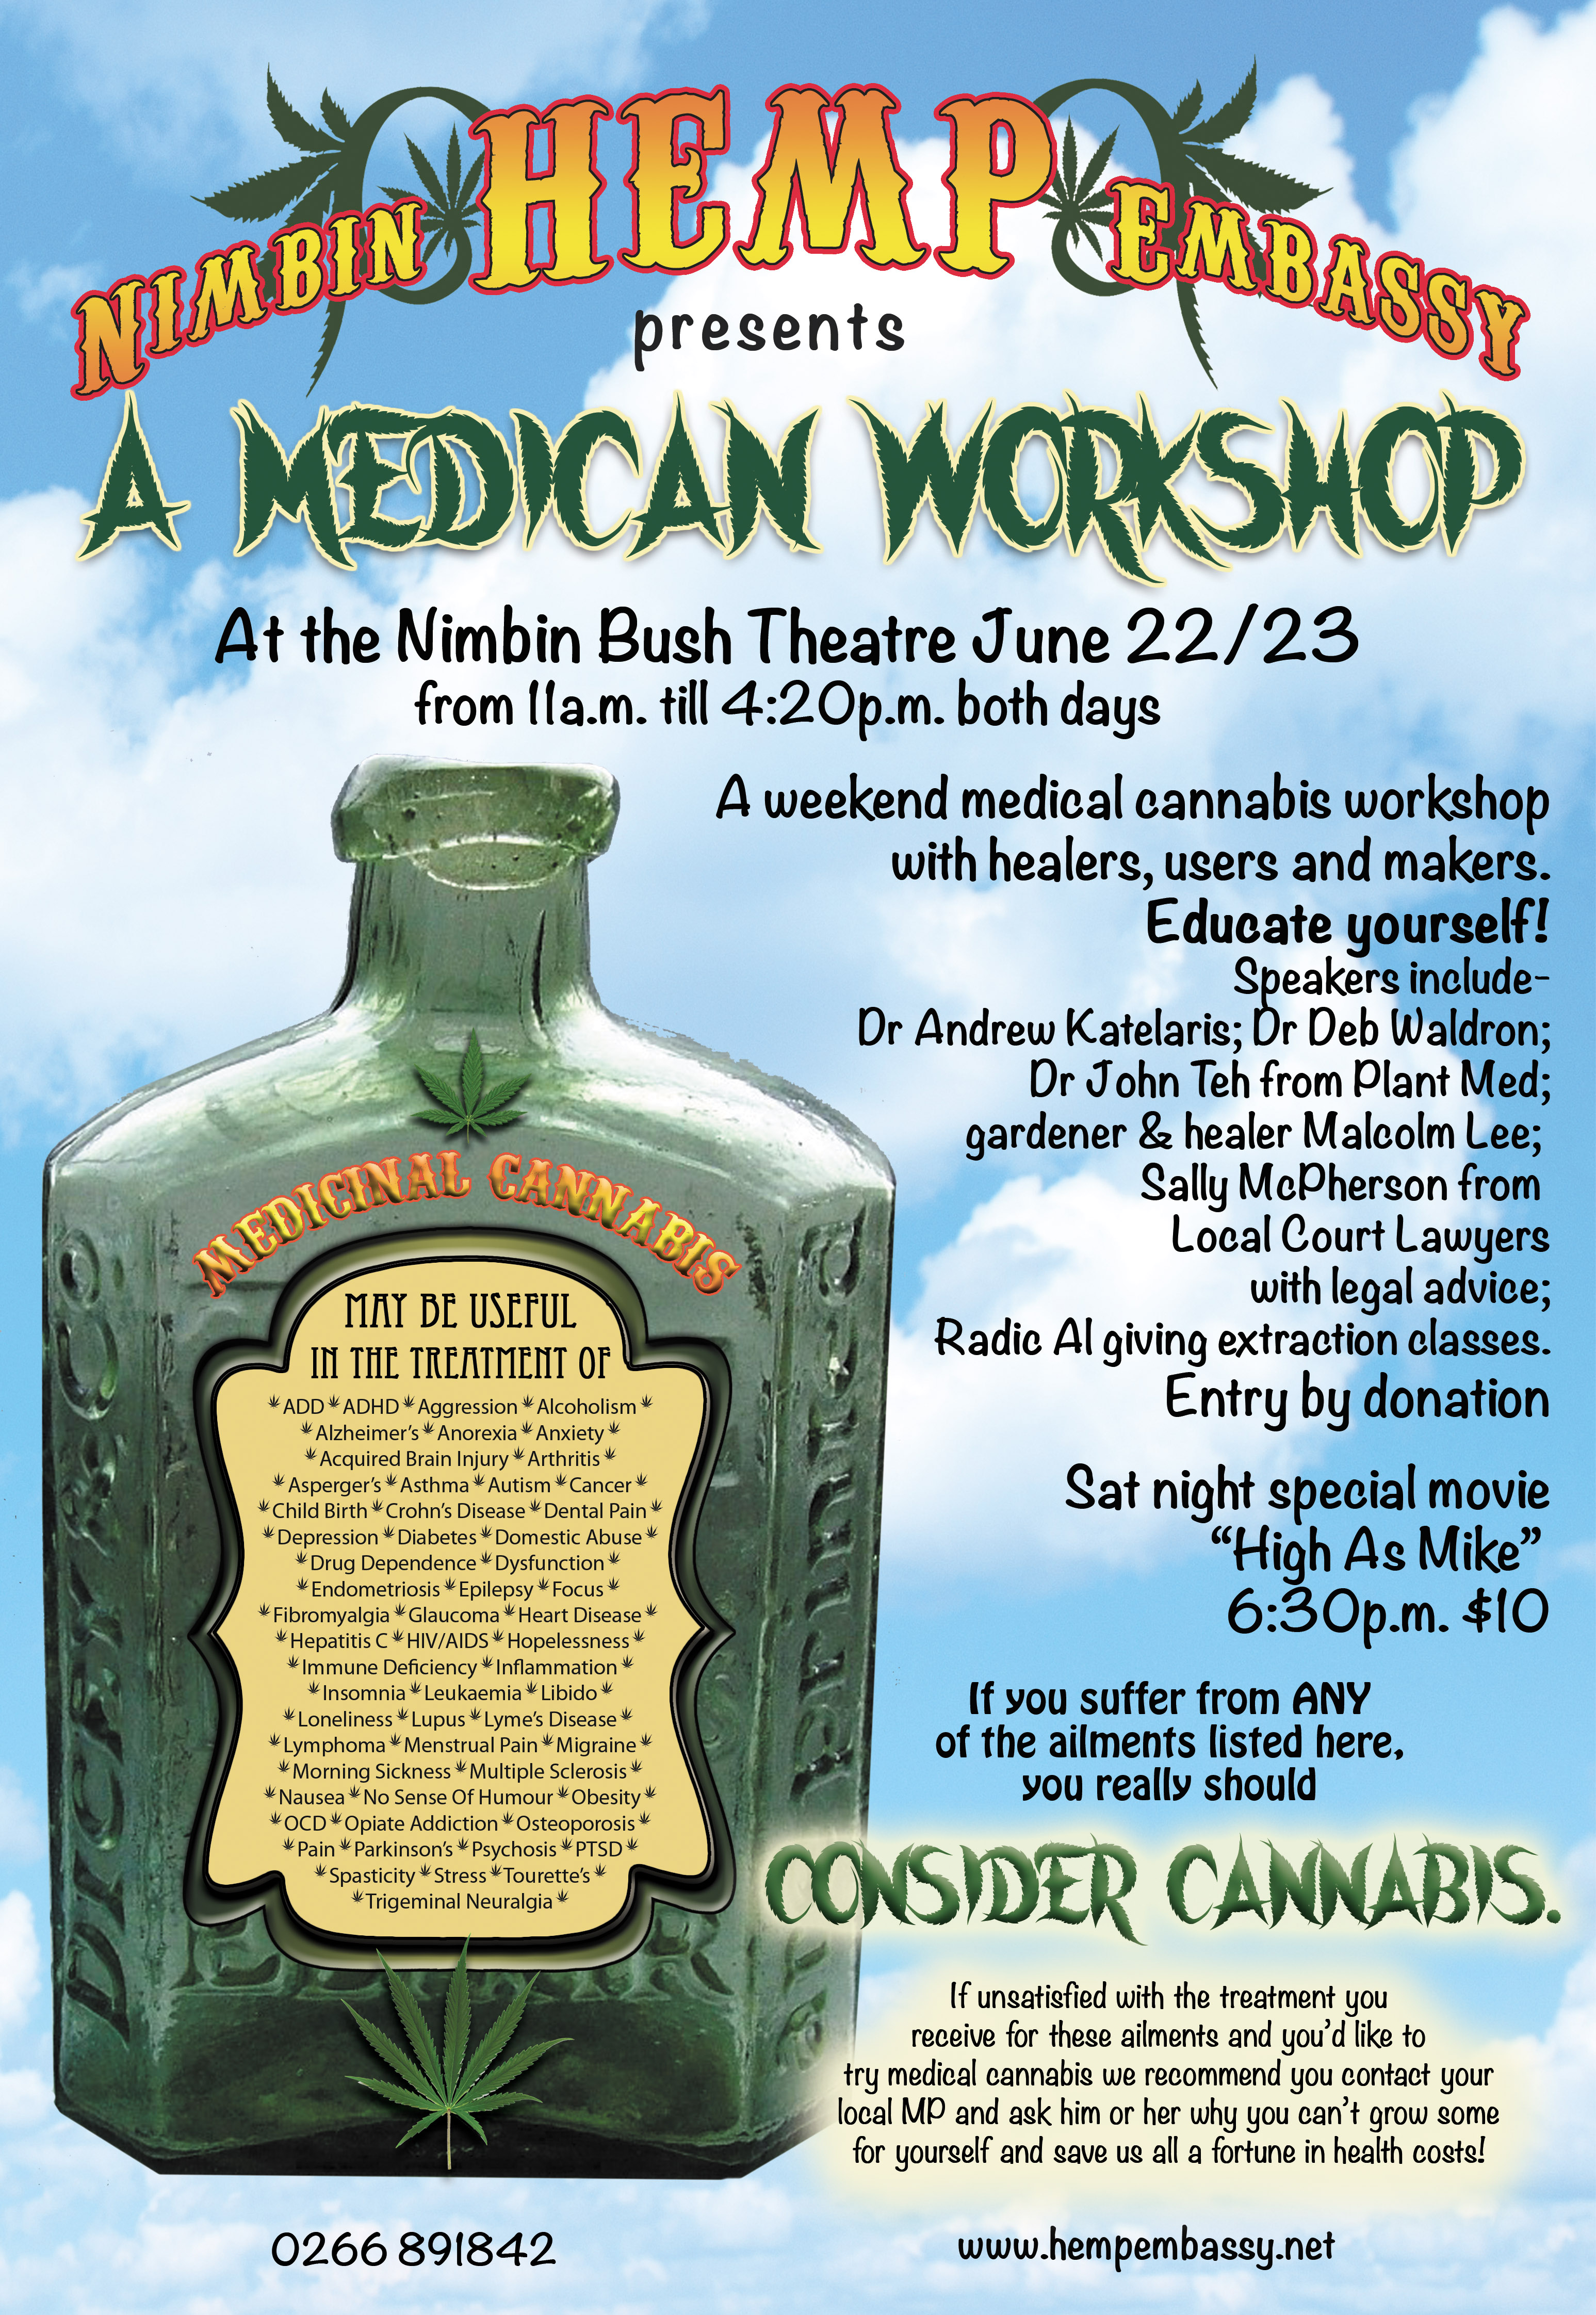 NEXT MEDICAL CANNABIS WEEKEND WORKSHOP IN NIMBIN JUNE 22/23 now includes the movie “High as Mike” on Saturday night